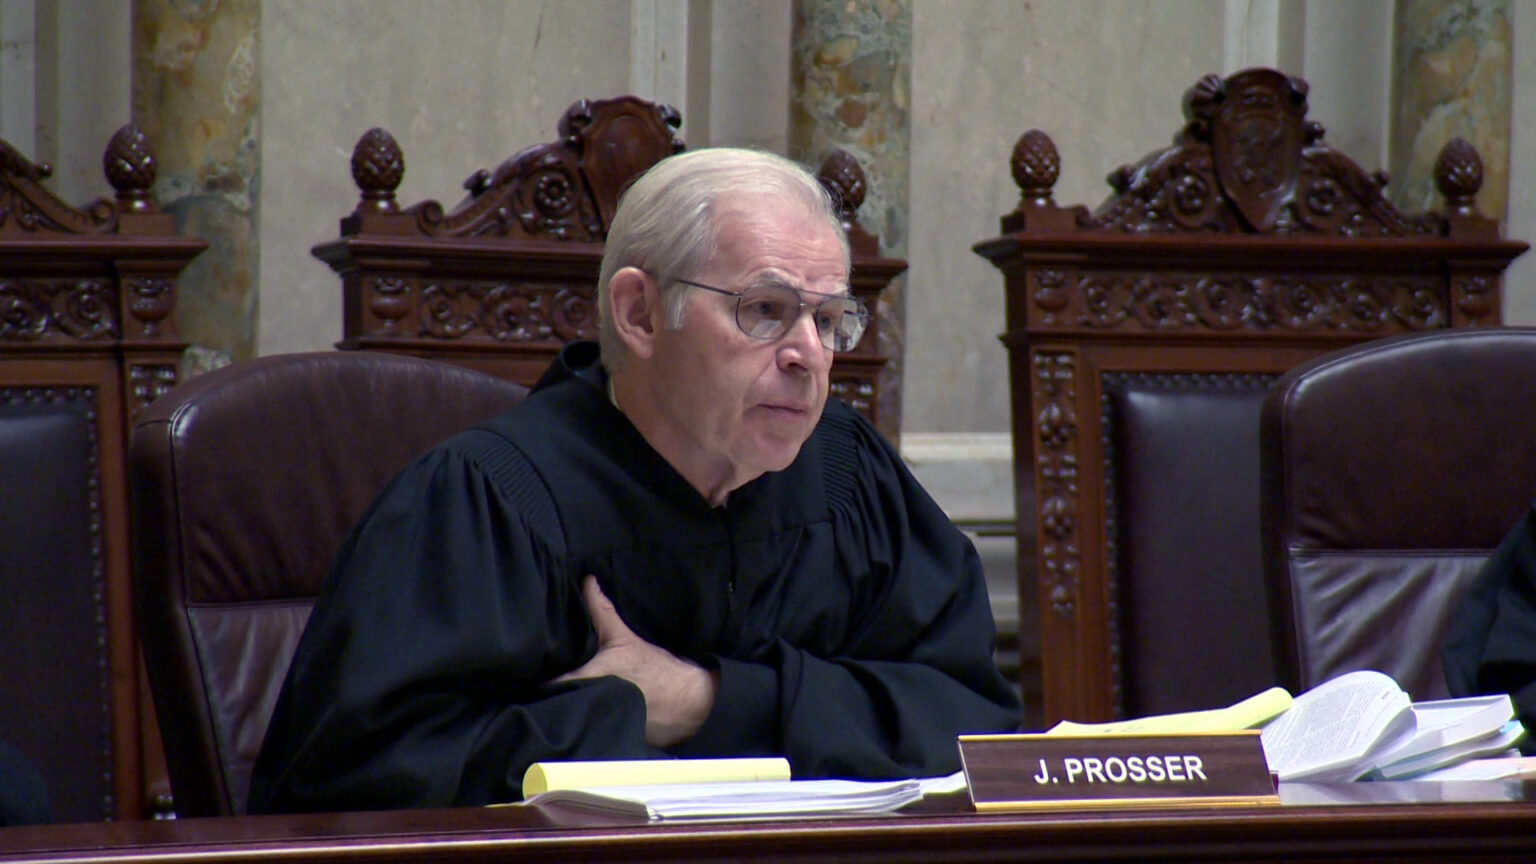 David Prosser sits in a high-backed leather chair with his arms folded on a judicial dais, with multiple papers and a nameplate reading J. Prosser on its surface, with multiple wood and leather high-backed chairs in the background, in a room with marble masonry.